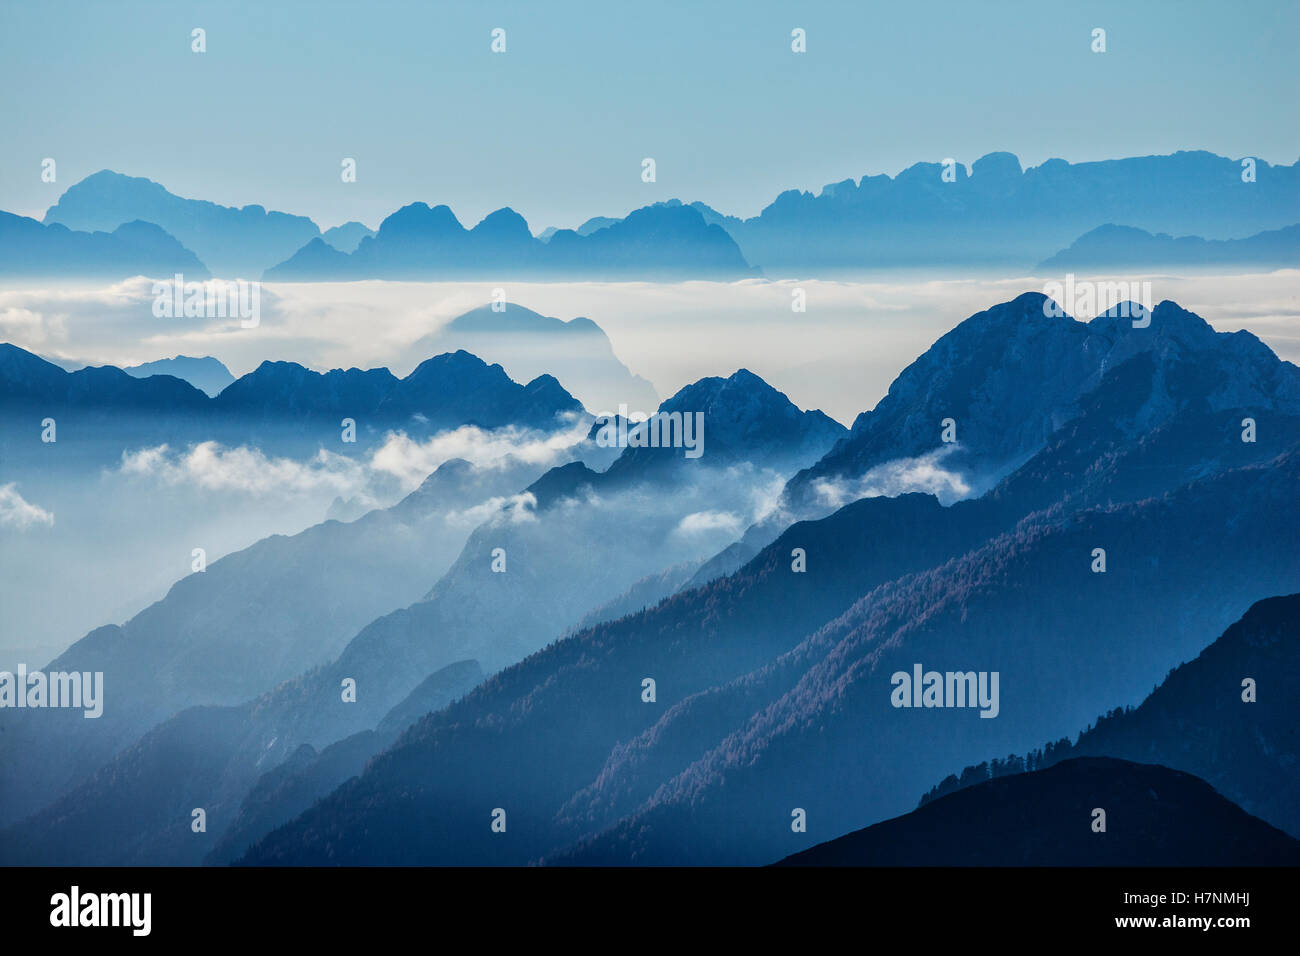 Foggy Mountain peaks background Banque D'Images